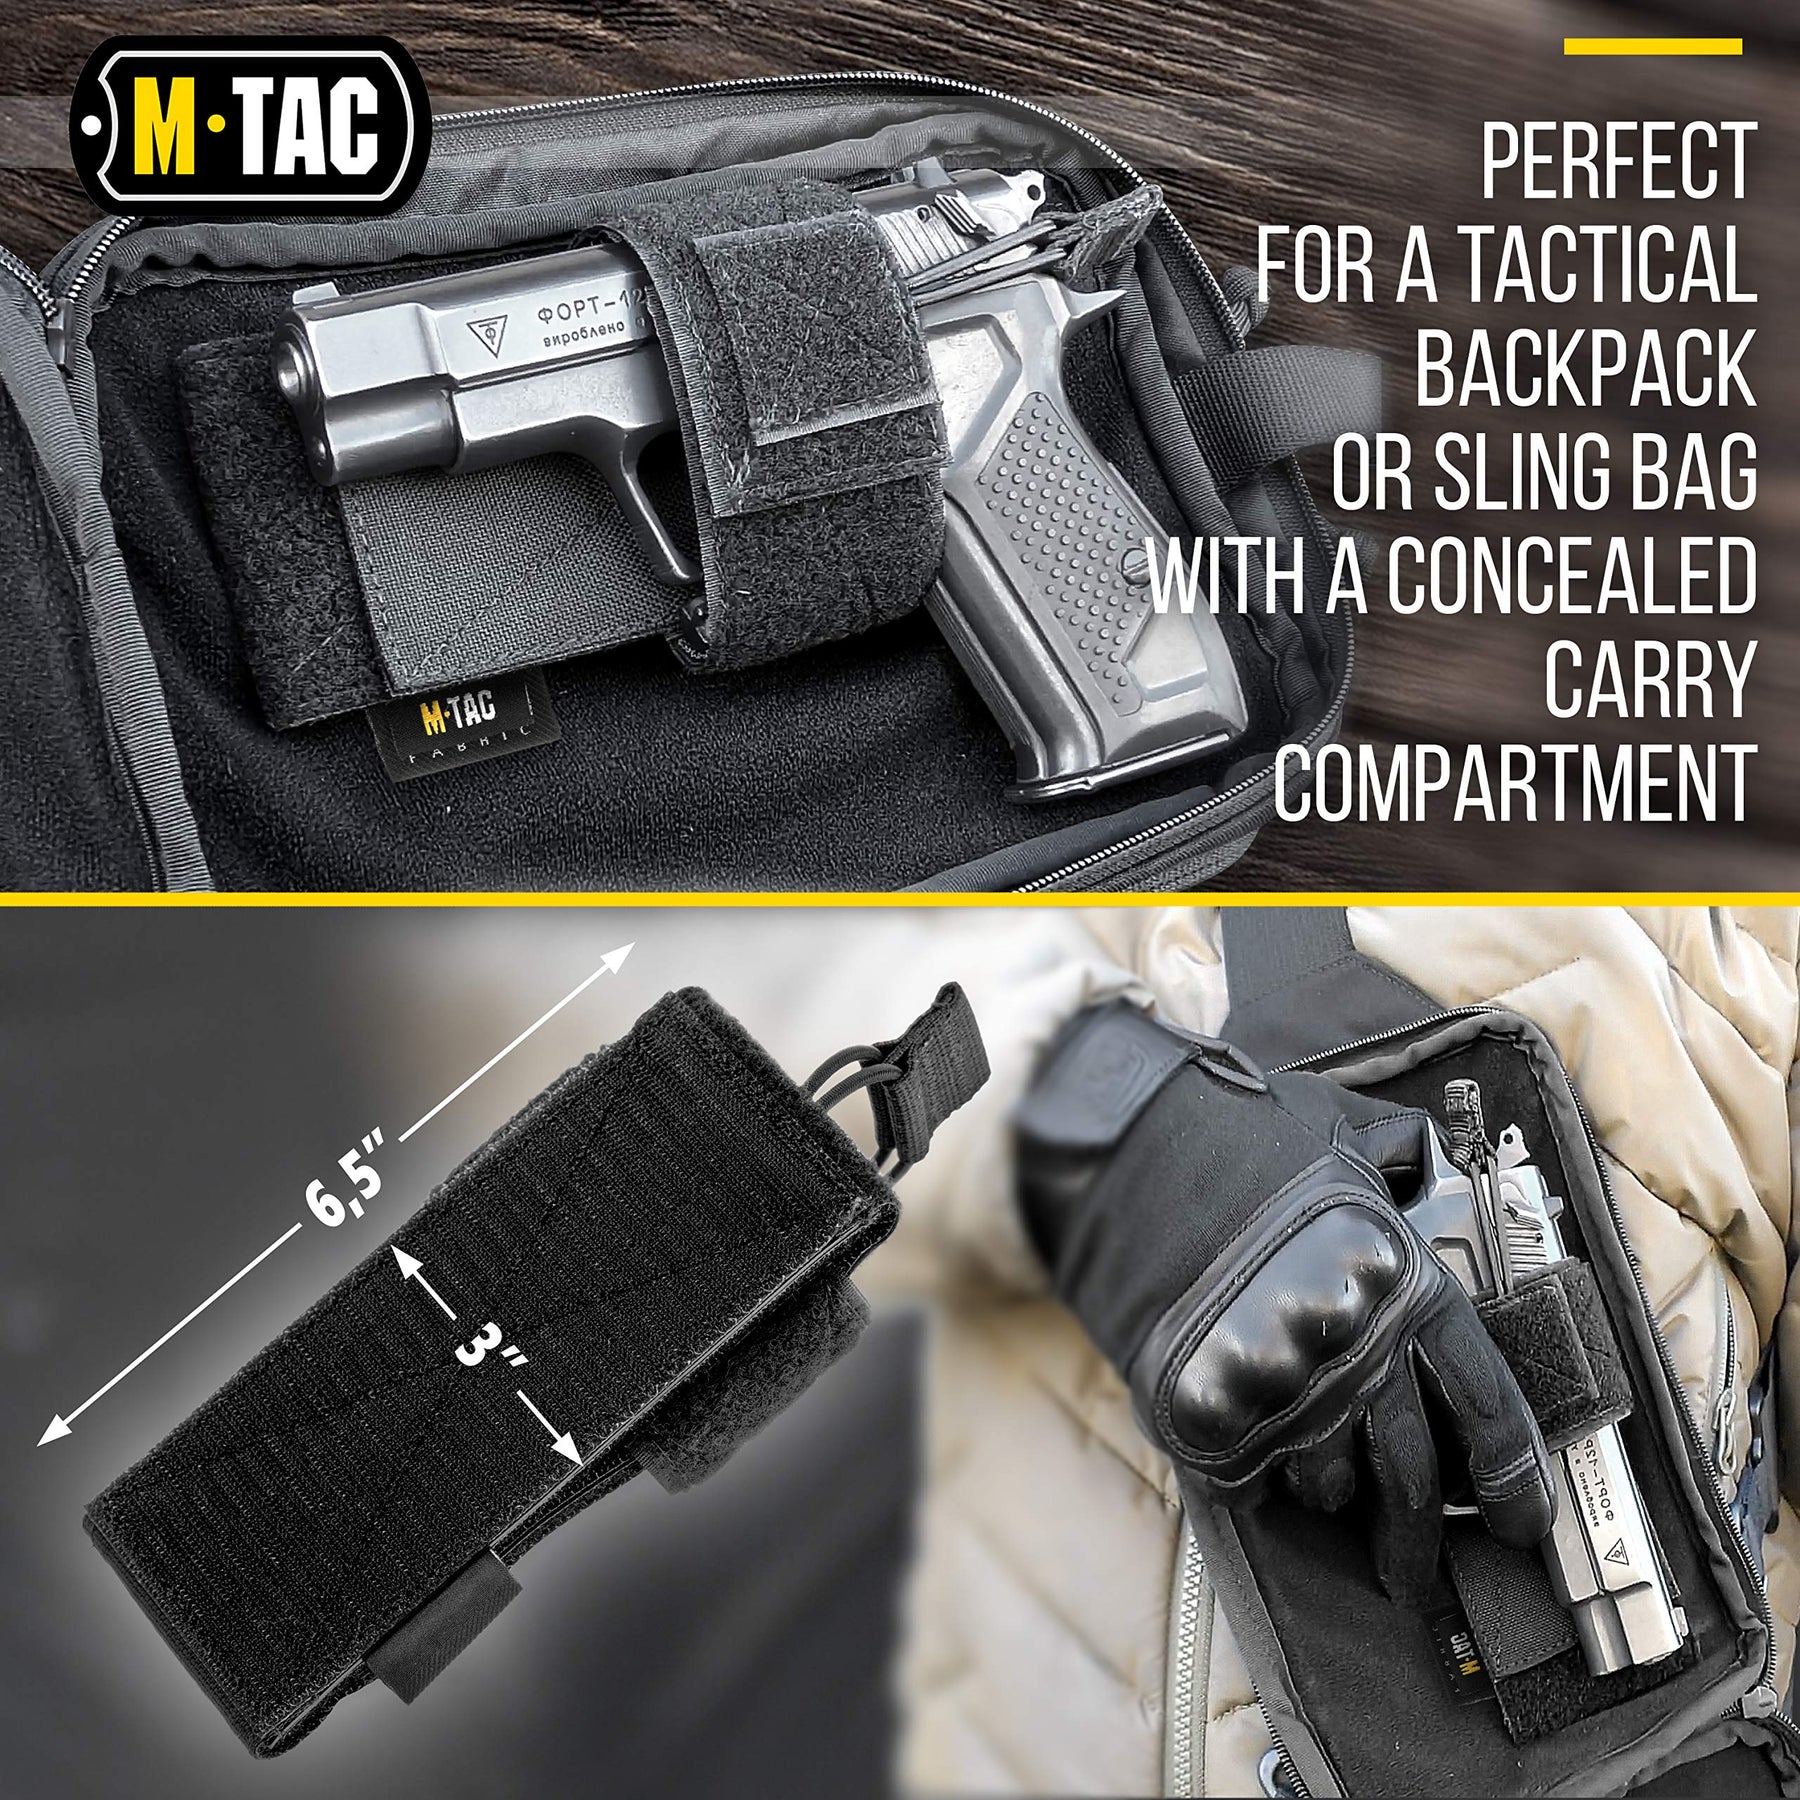  M-Tac Universal Gun Holster for Concealed Carry CCW Holster -  Handgun Storage - Pistol Concealed Carry Holster for Men and Women (Black)  : Sports & Outdoors